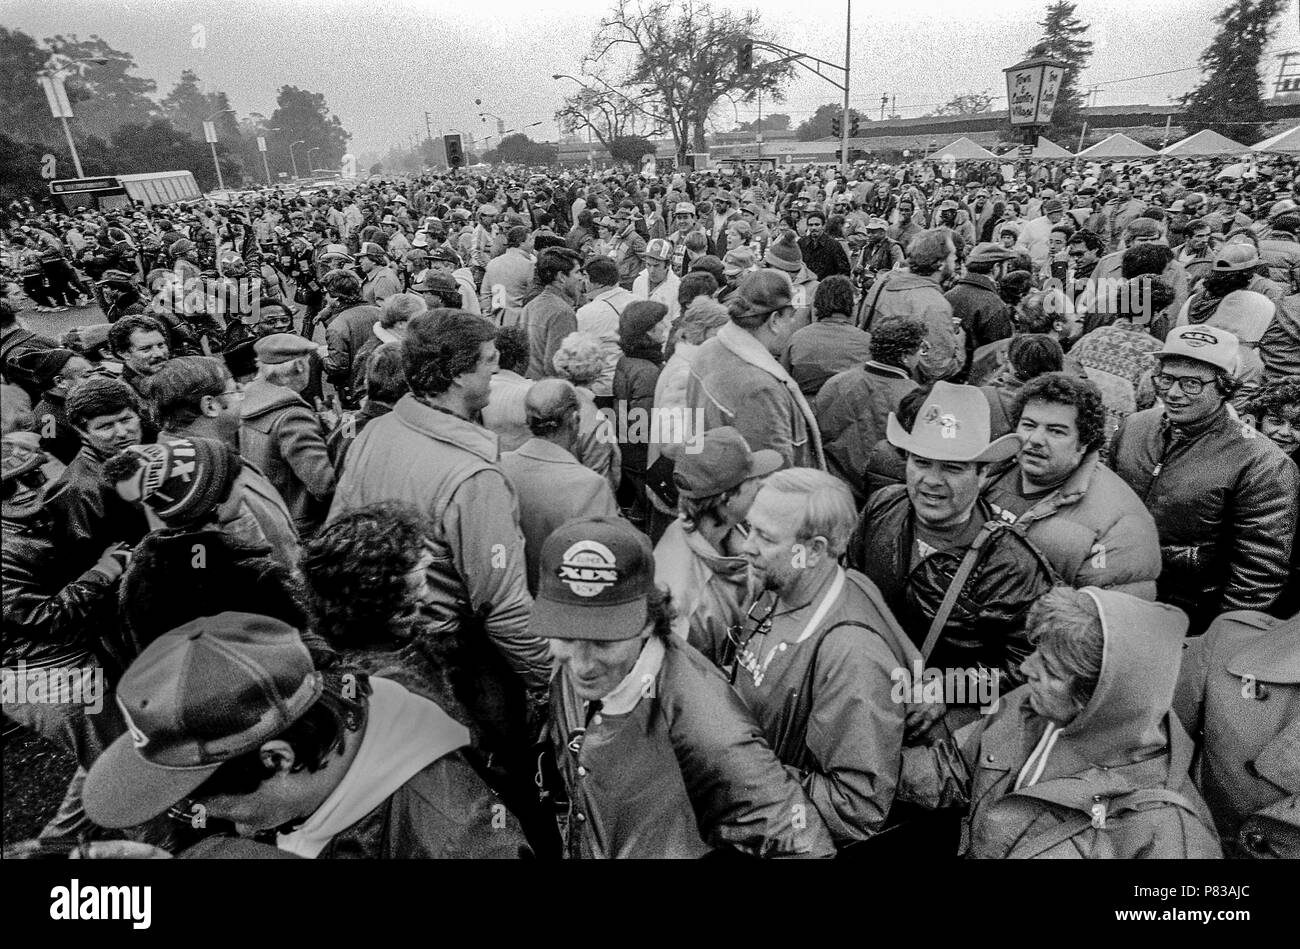 Stanford, California, USA. 20th Jan, 1985. Crowd files through gate 2 into the stadium after leaving the Super Bowl XIX tailgate on the Stanford University campus. The San Francisco 49ers defeated the Miami Dolphins 38-16 on Sunday, January 20, 1985. Credit: Al Golub/ZUMA Wire/Alamy Live News Stock Photo